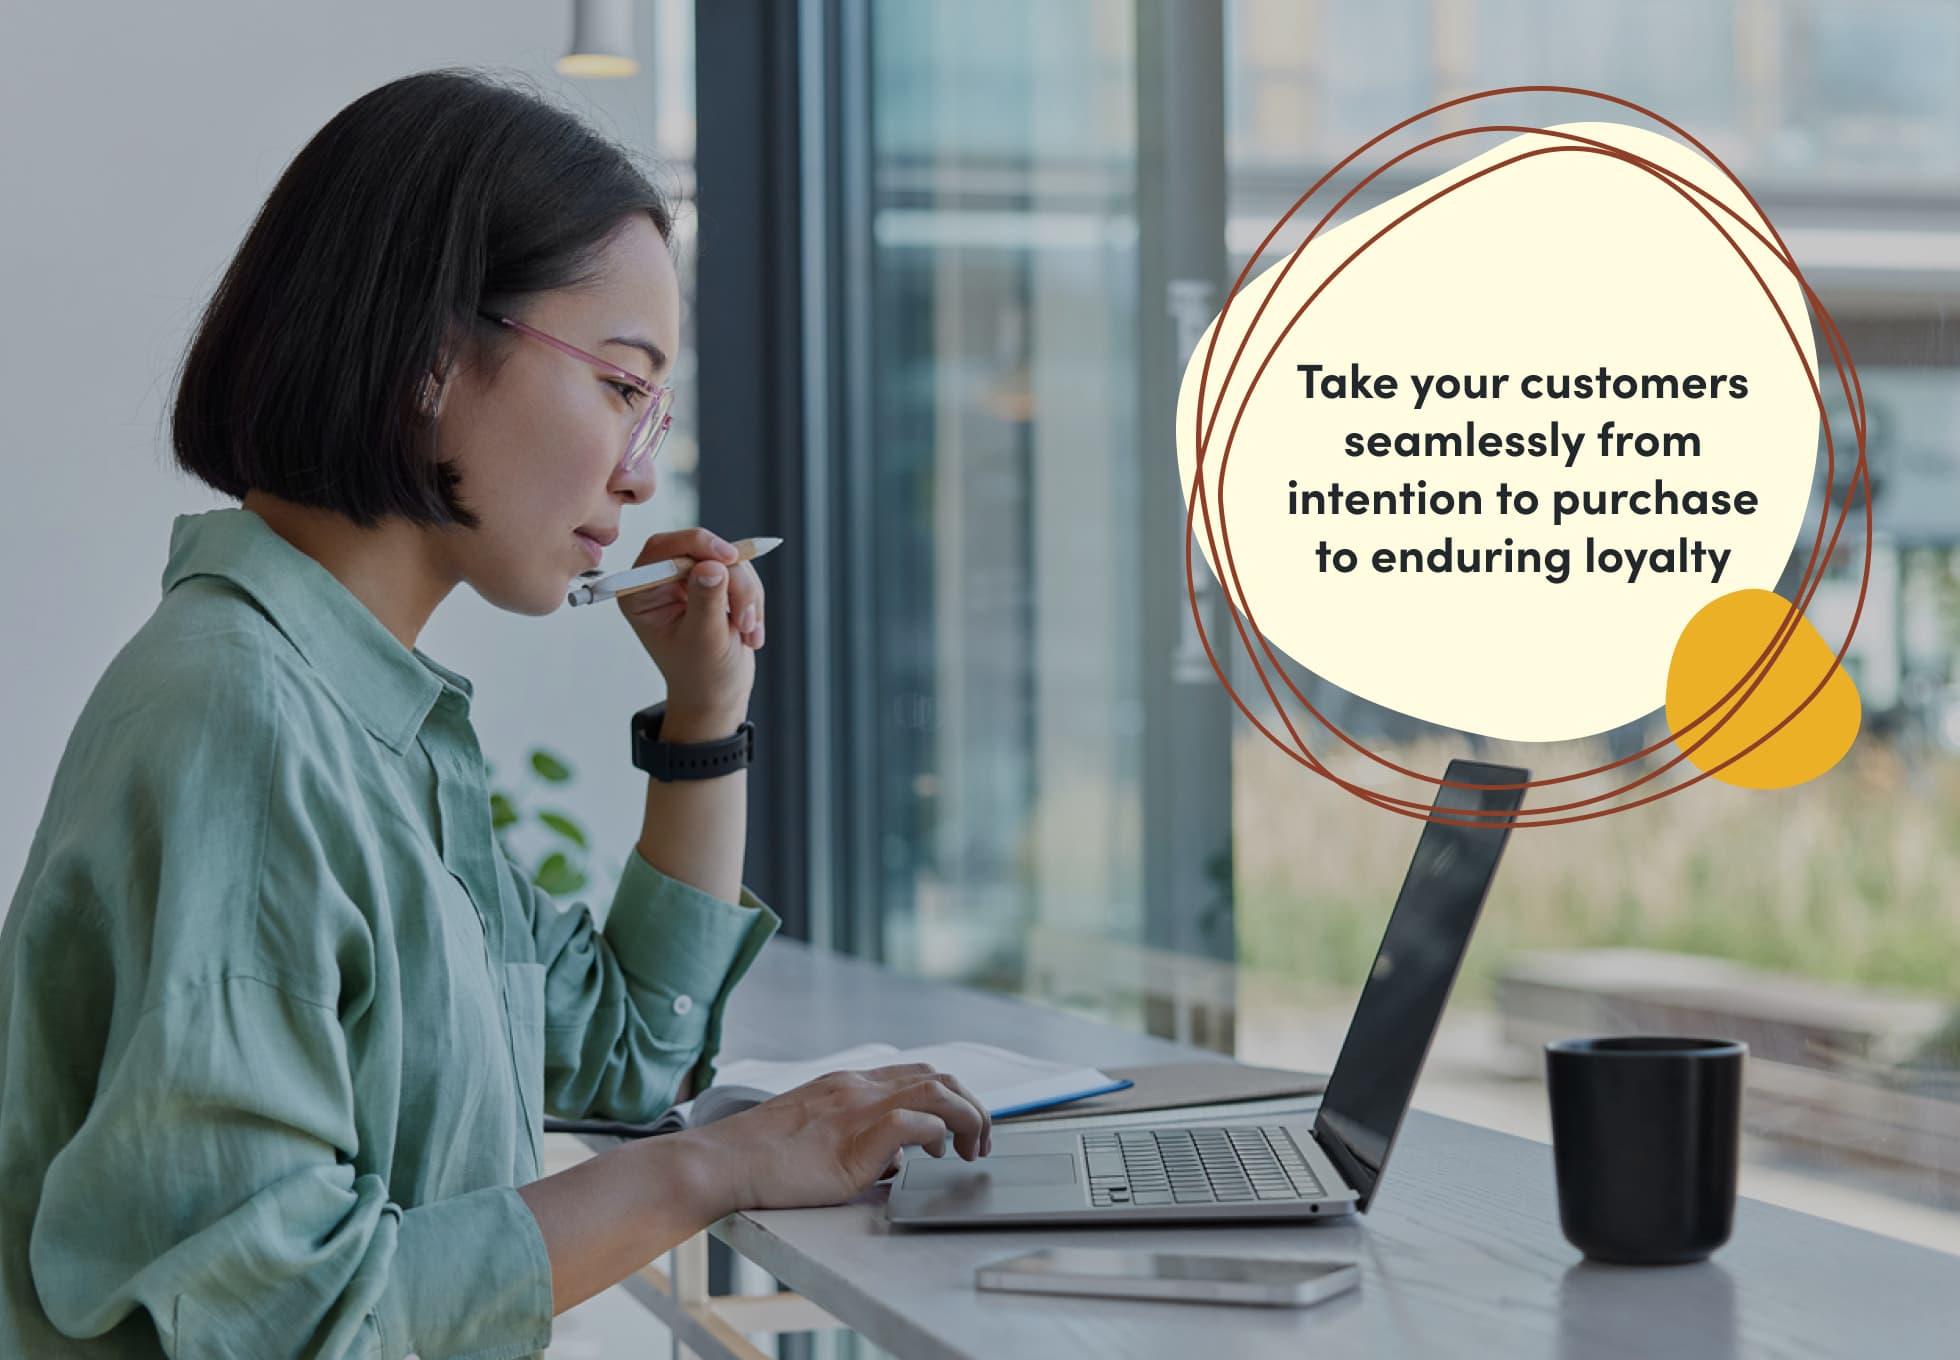 A person is sitting at a desk and looking at their laptop in a thoughtful manner. The sentence imposed on the image says, "Take your customers seamlessly from intention to purchase to enduring loyalty."